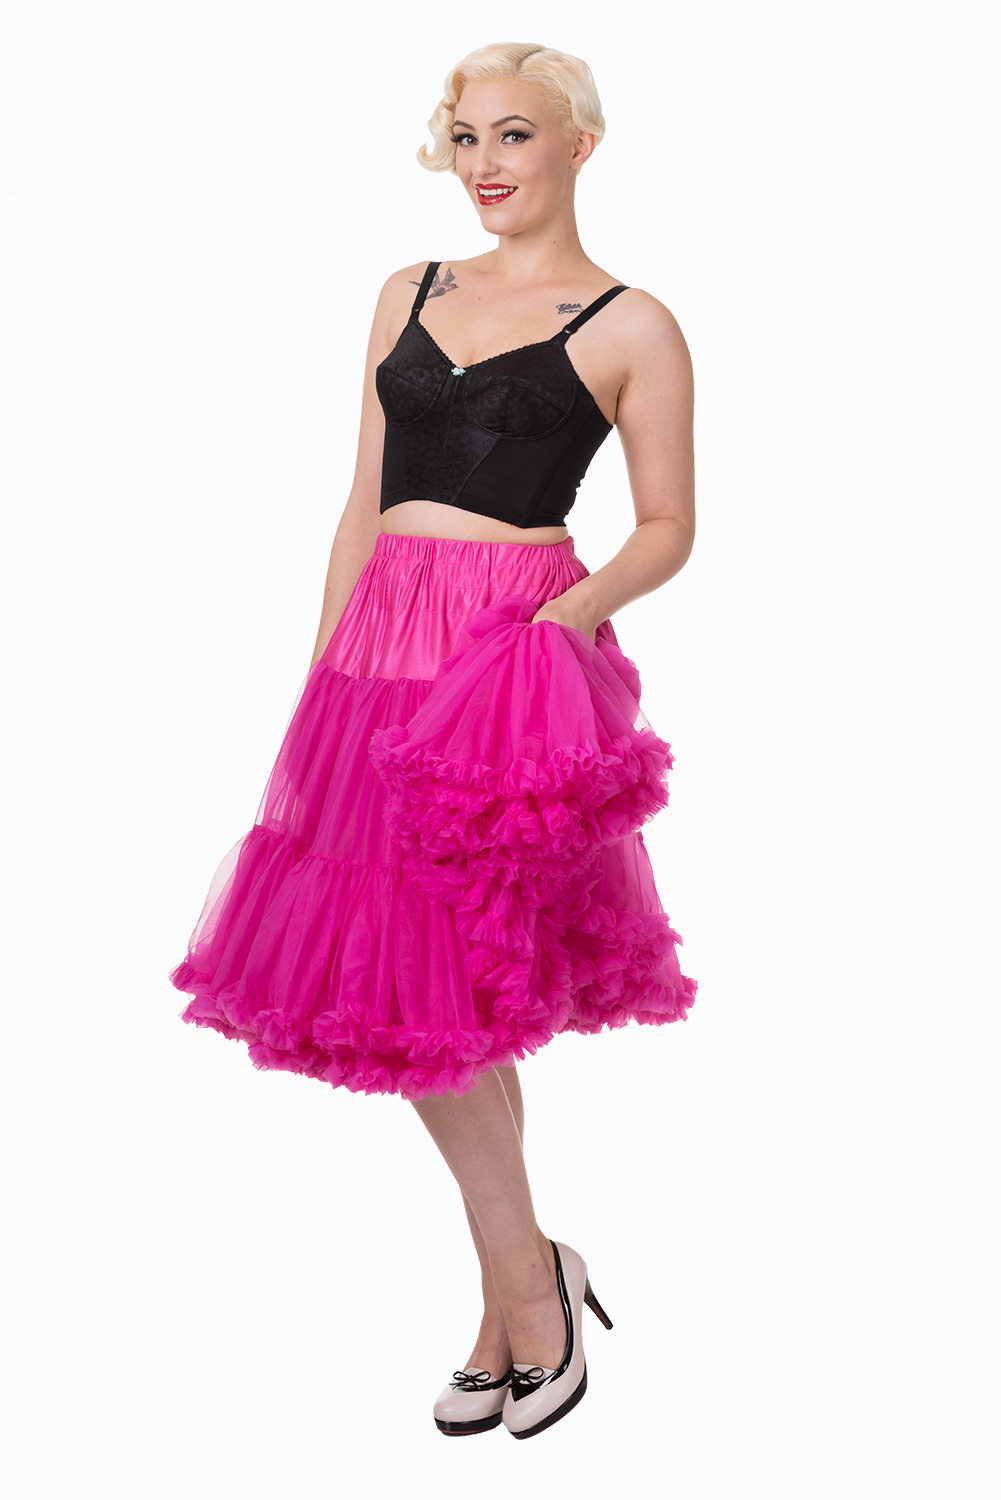 Banned Retro 50s Lizzy Lifeforms Hot Pink Petticoat